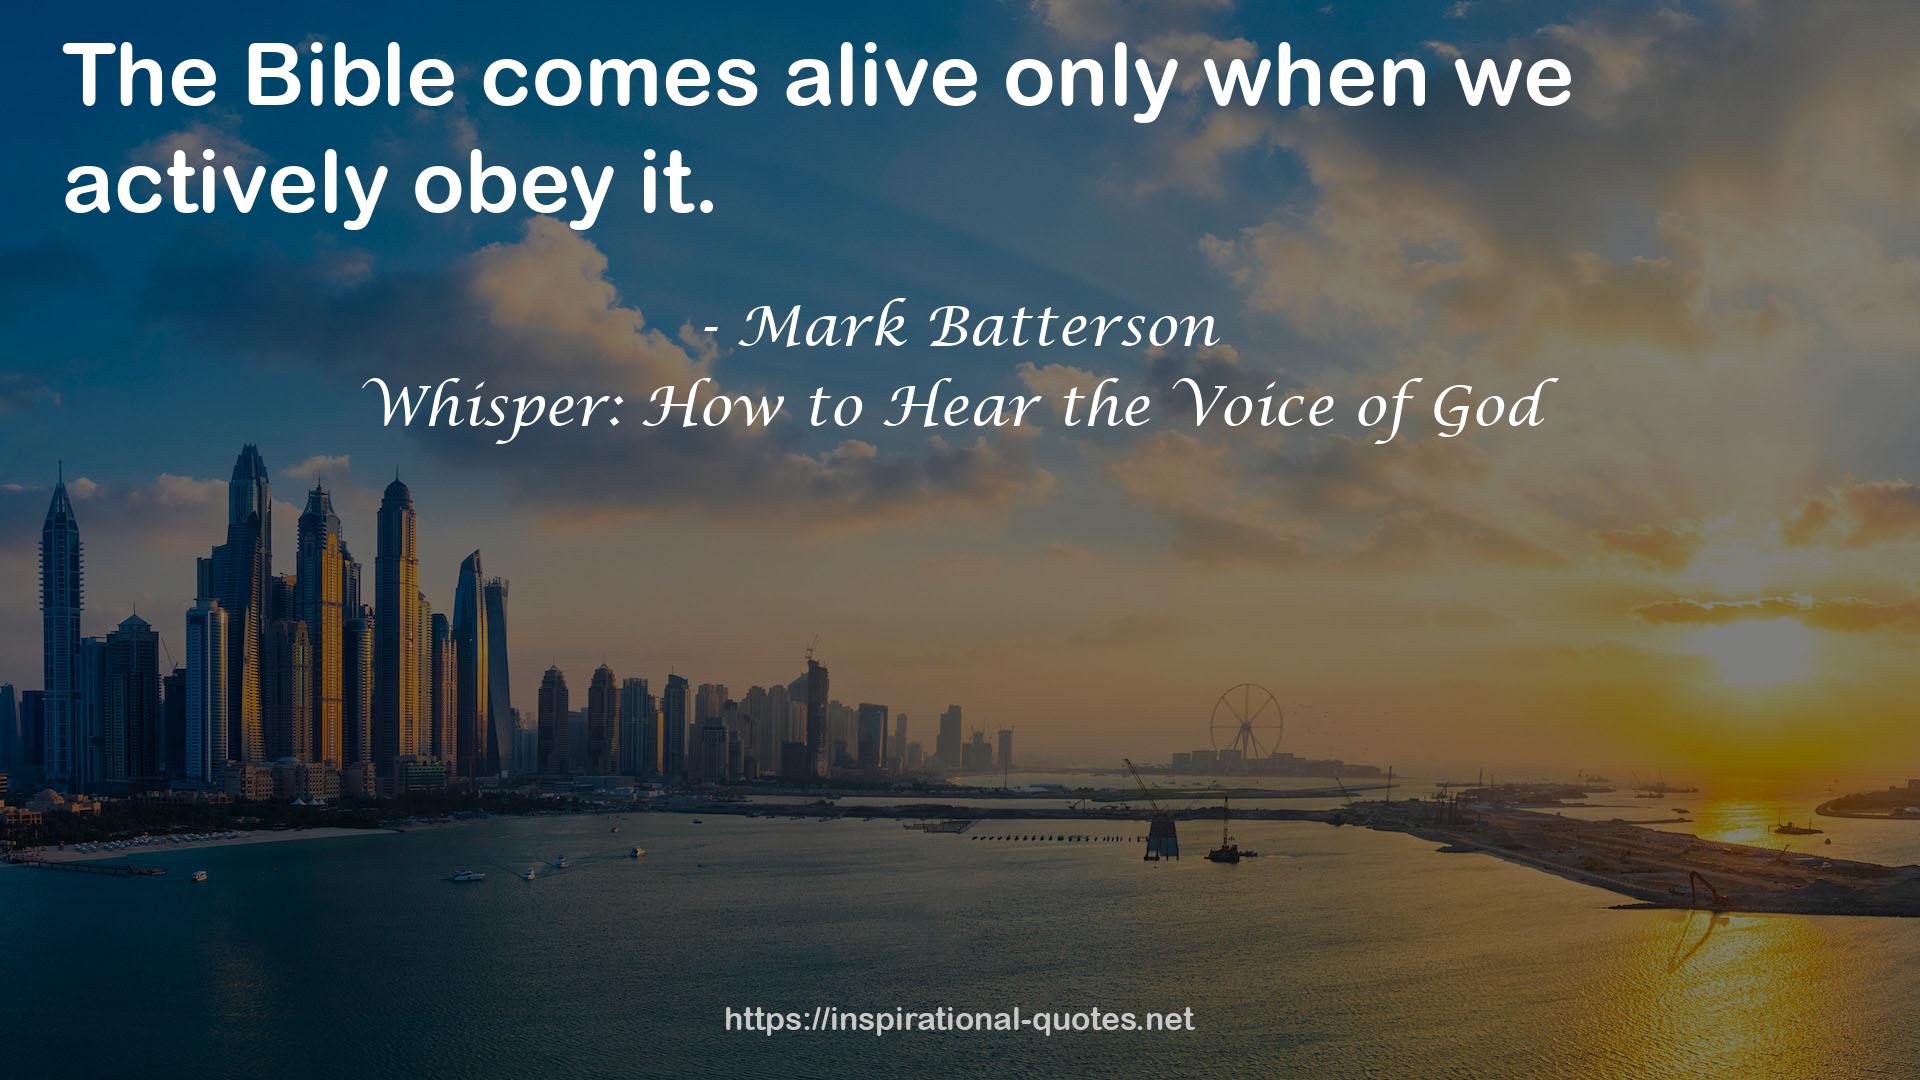 Whisper: How to Hear the Voice of God QUOTES